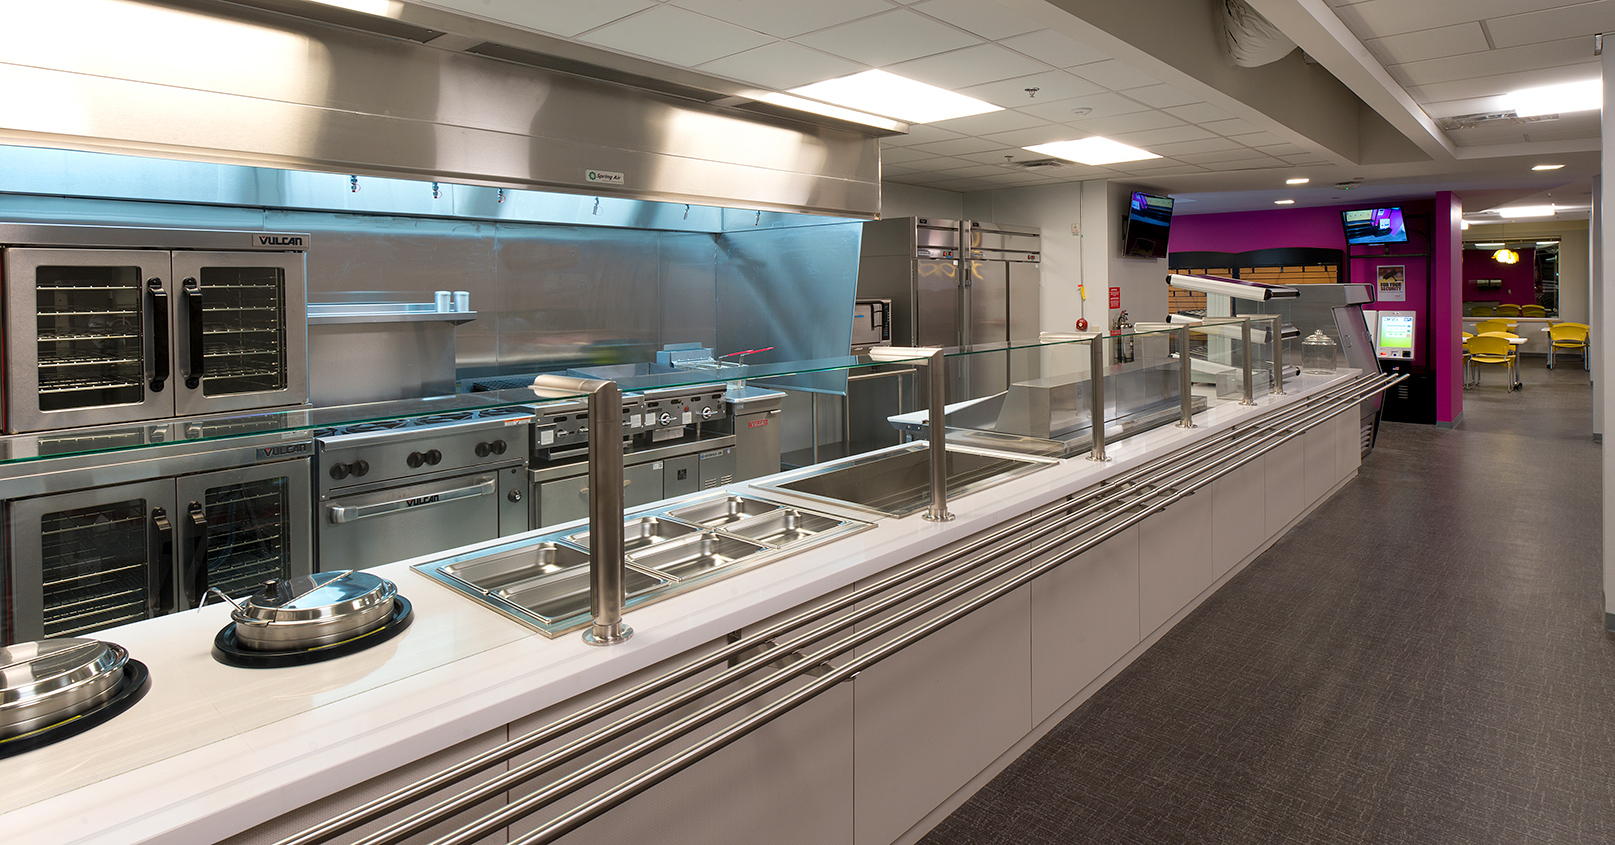 Cafeteria serving line inside the T Mobile Corporate Office